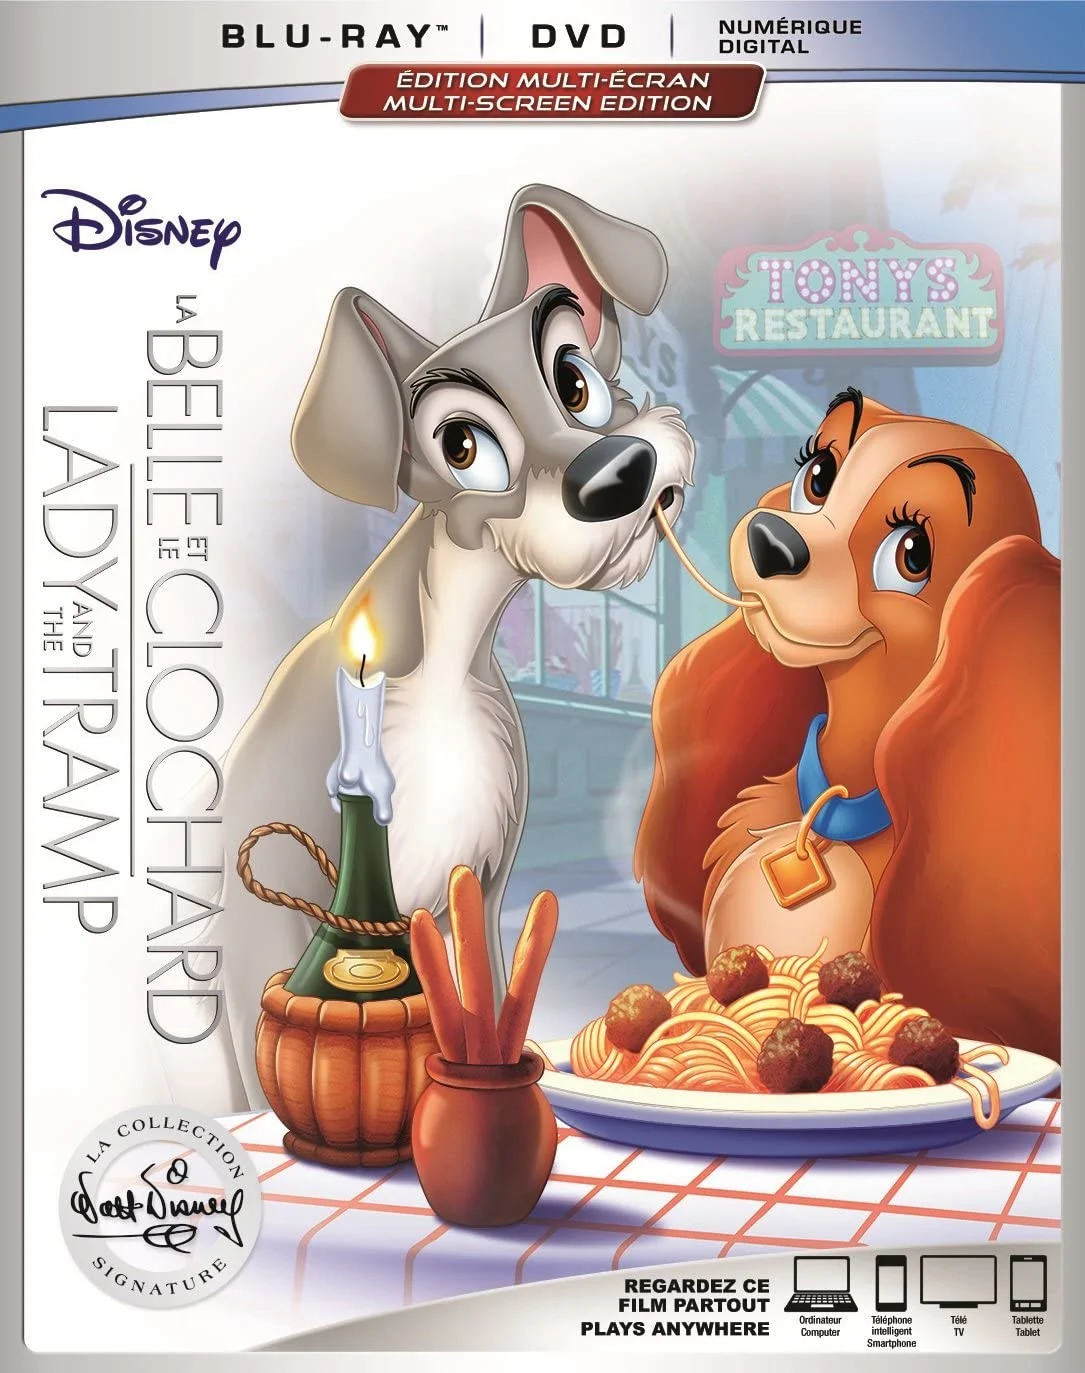 Lady and the Tramp – Disney 100 PKG (Blu-ray/DVD Combo) on MovieShack